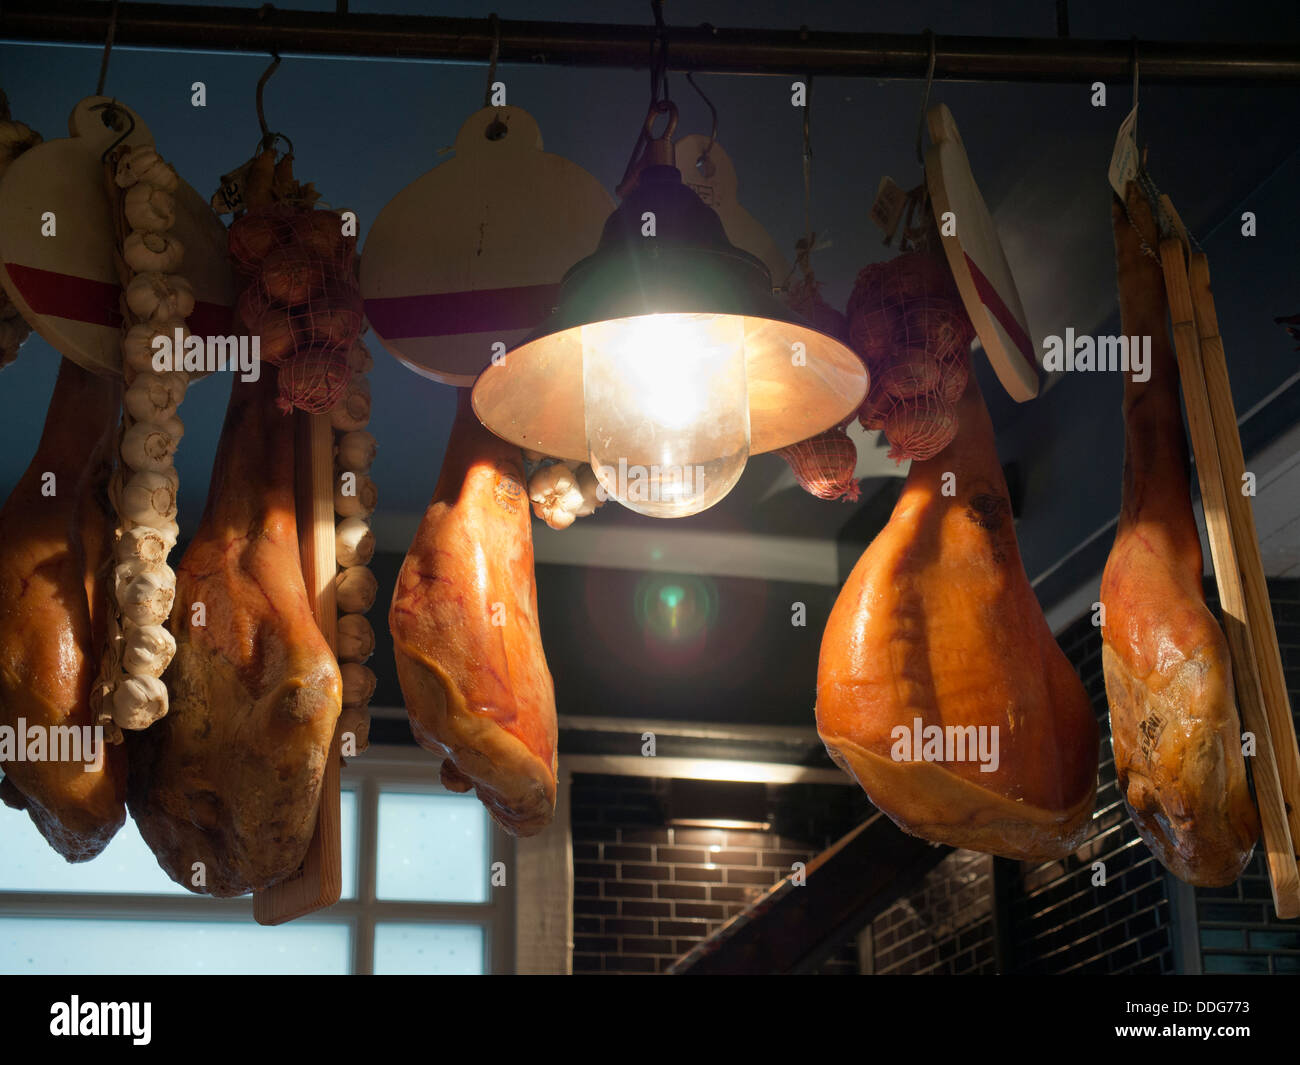 Suspended hams in an Italian Restaurant in Oxford, England 2 Stock Photo